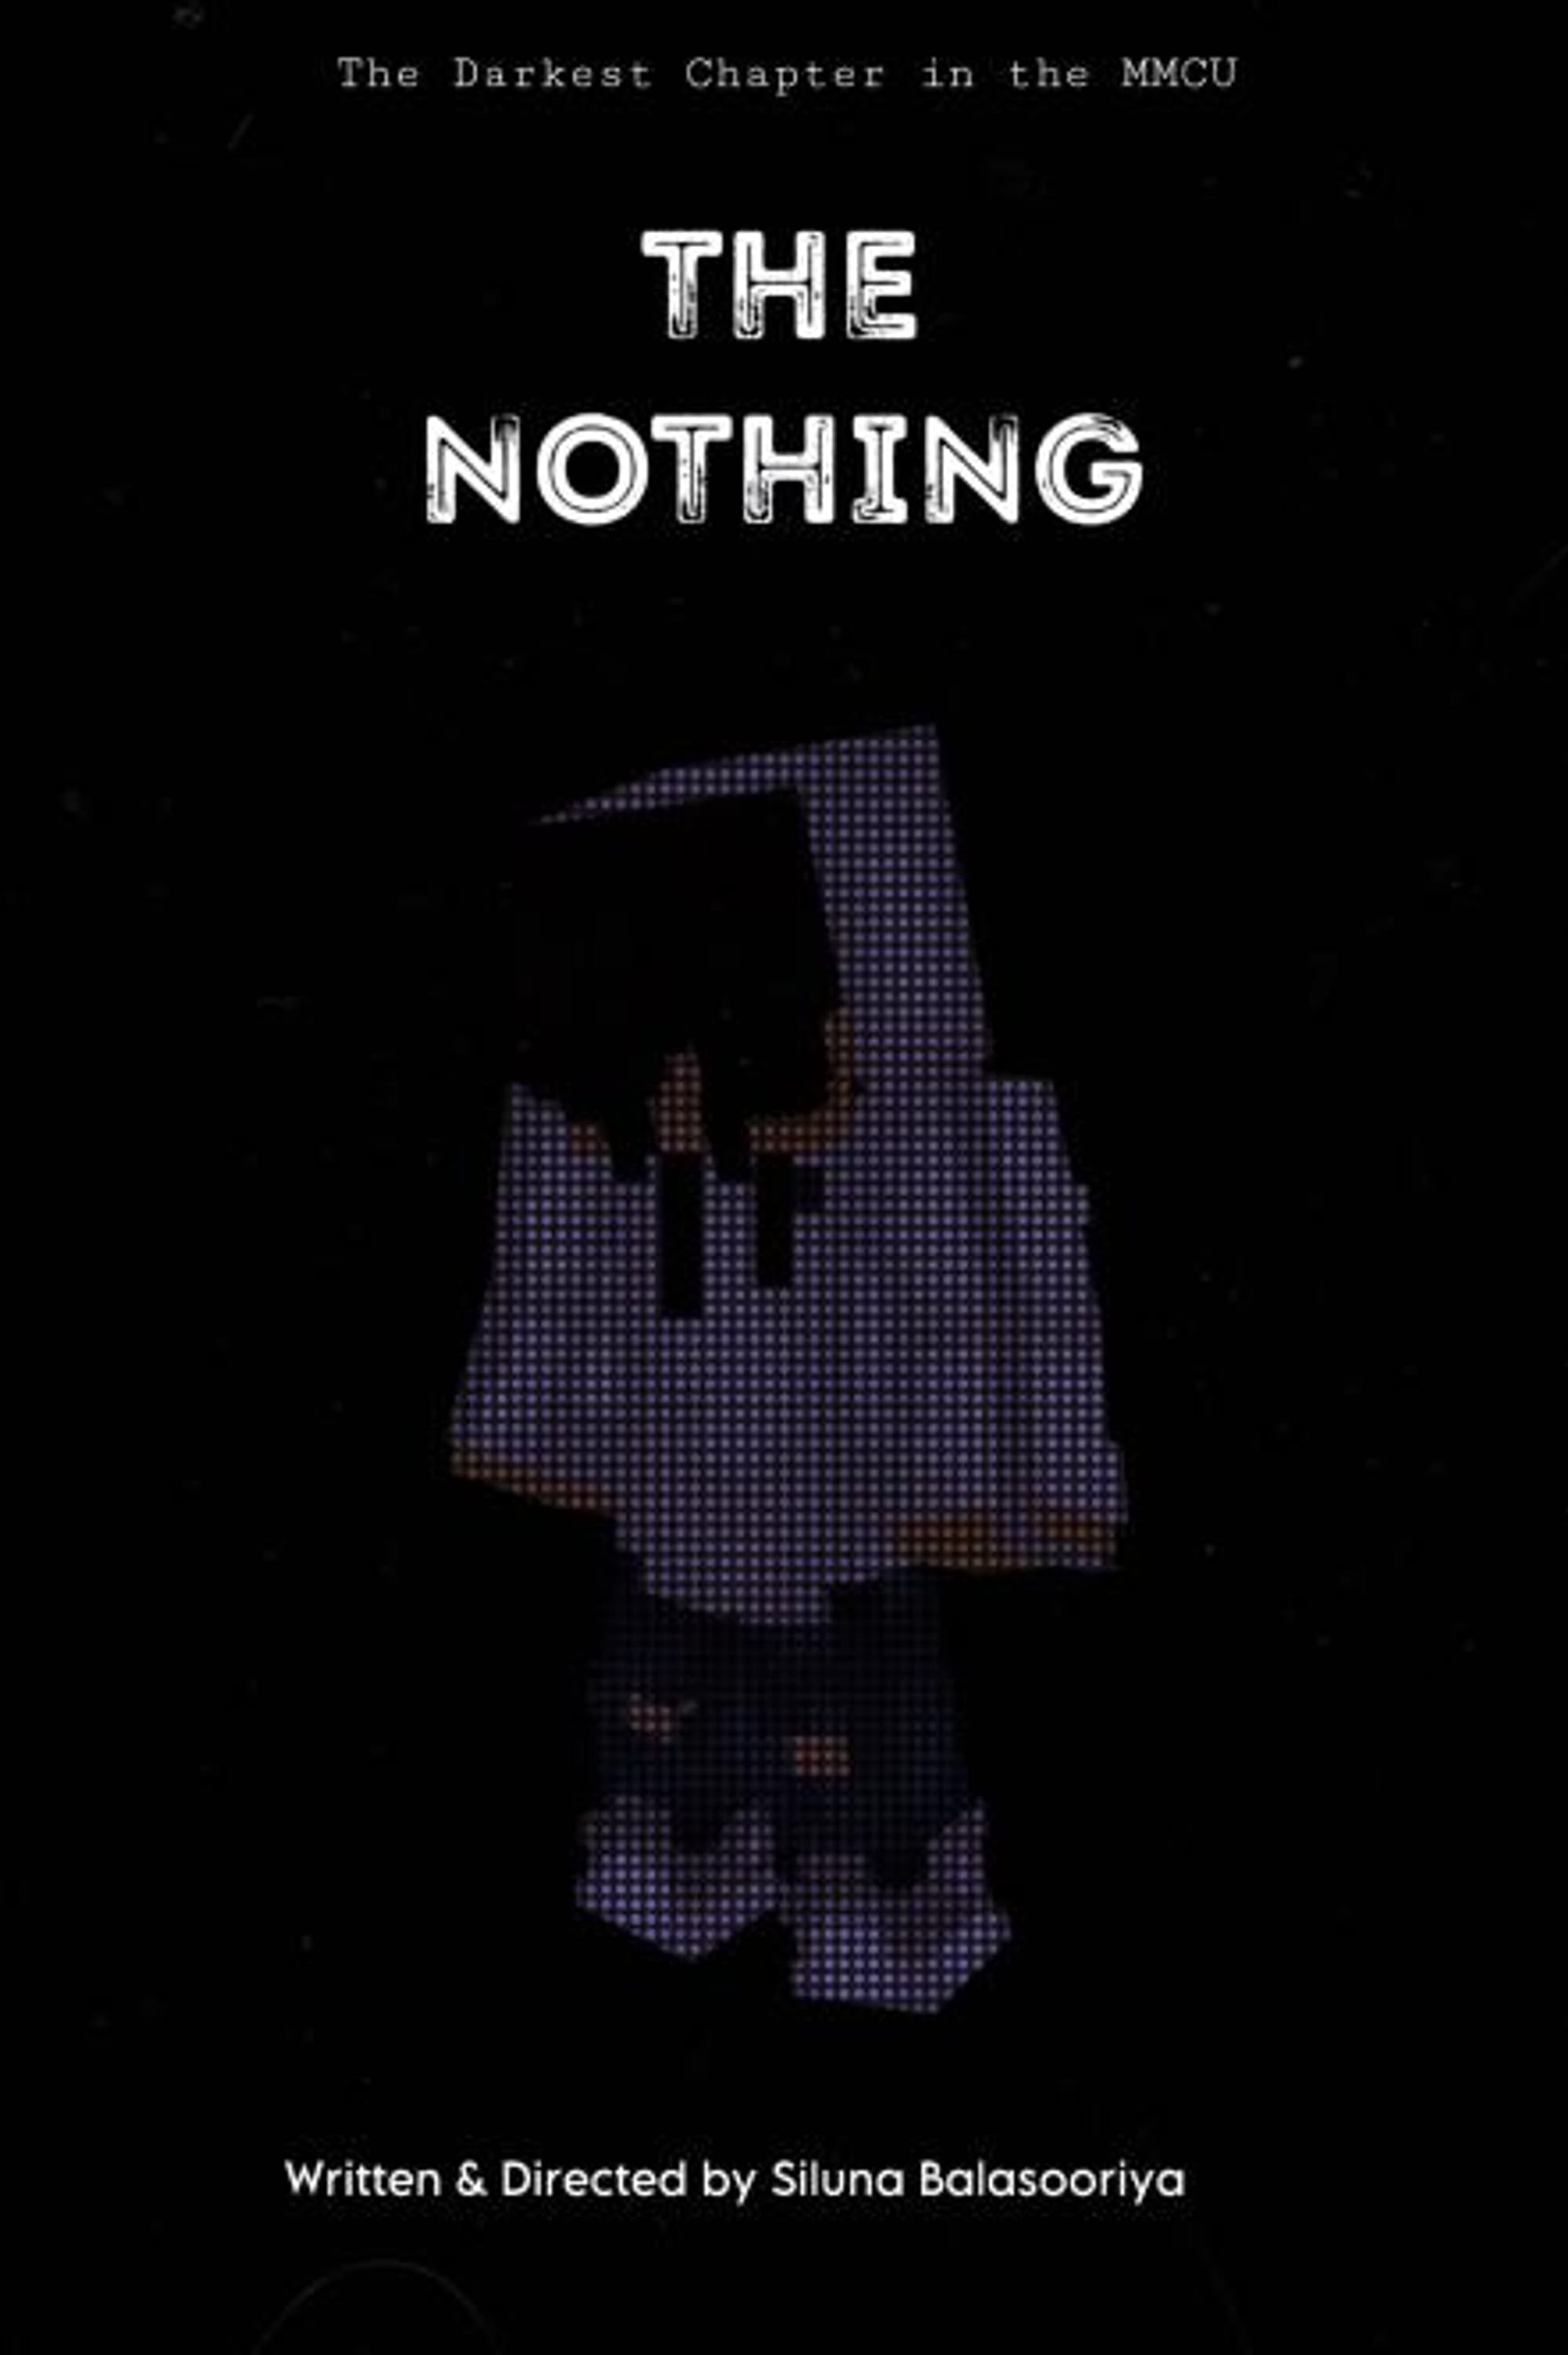 THE NOTHING